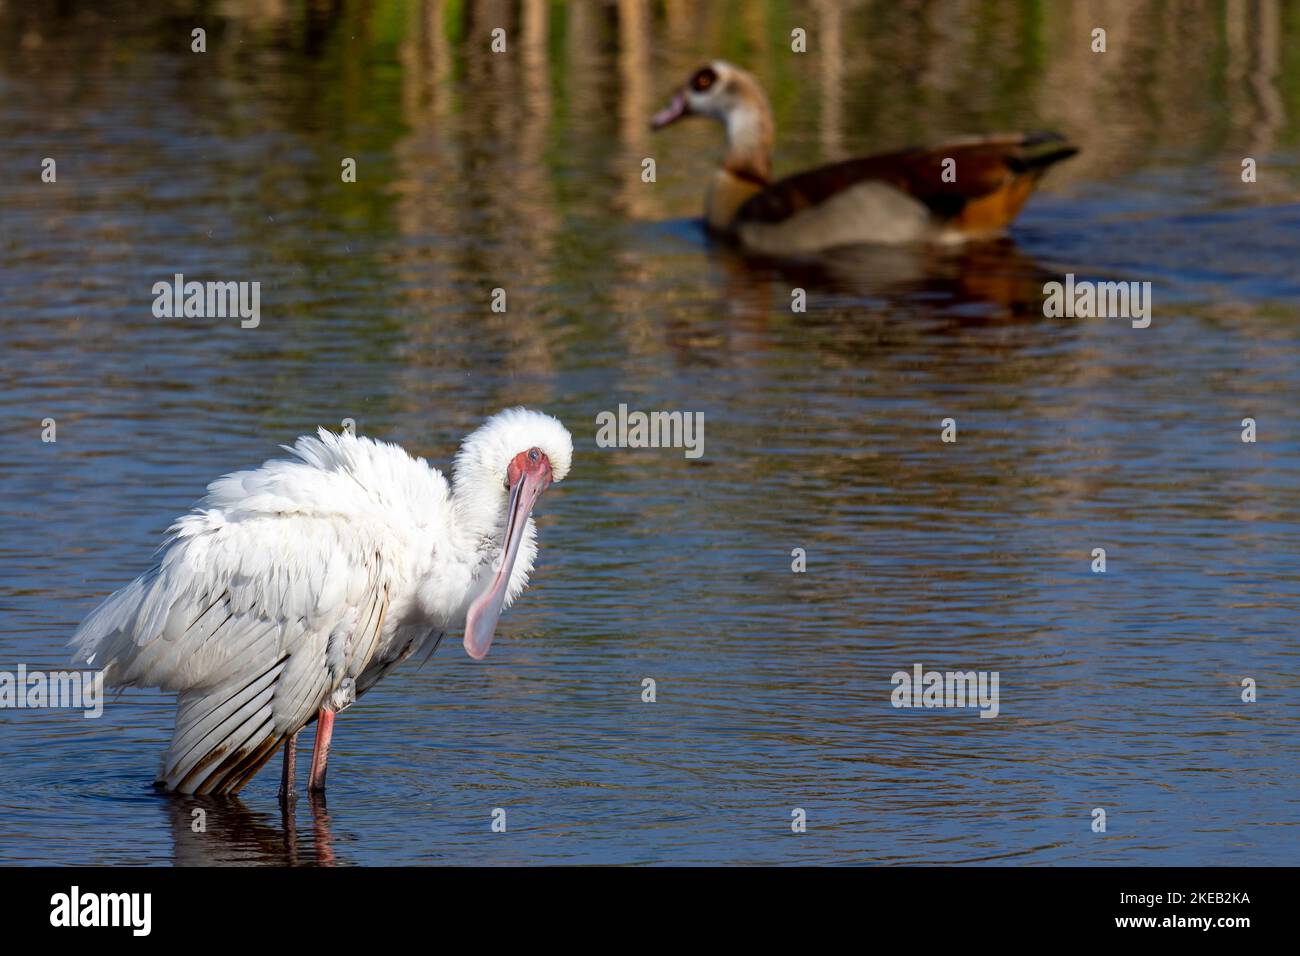 African spoonbill (Platalea alba) preening itself while an Egyptian goose (Alopochen aegyptiaca) swims past in the background. Western Cape. South Afr Stock Photo